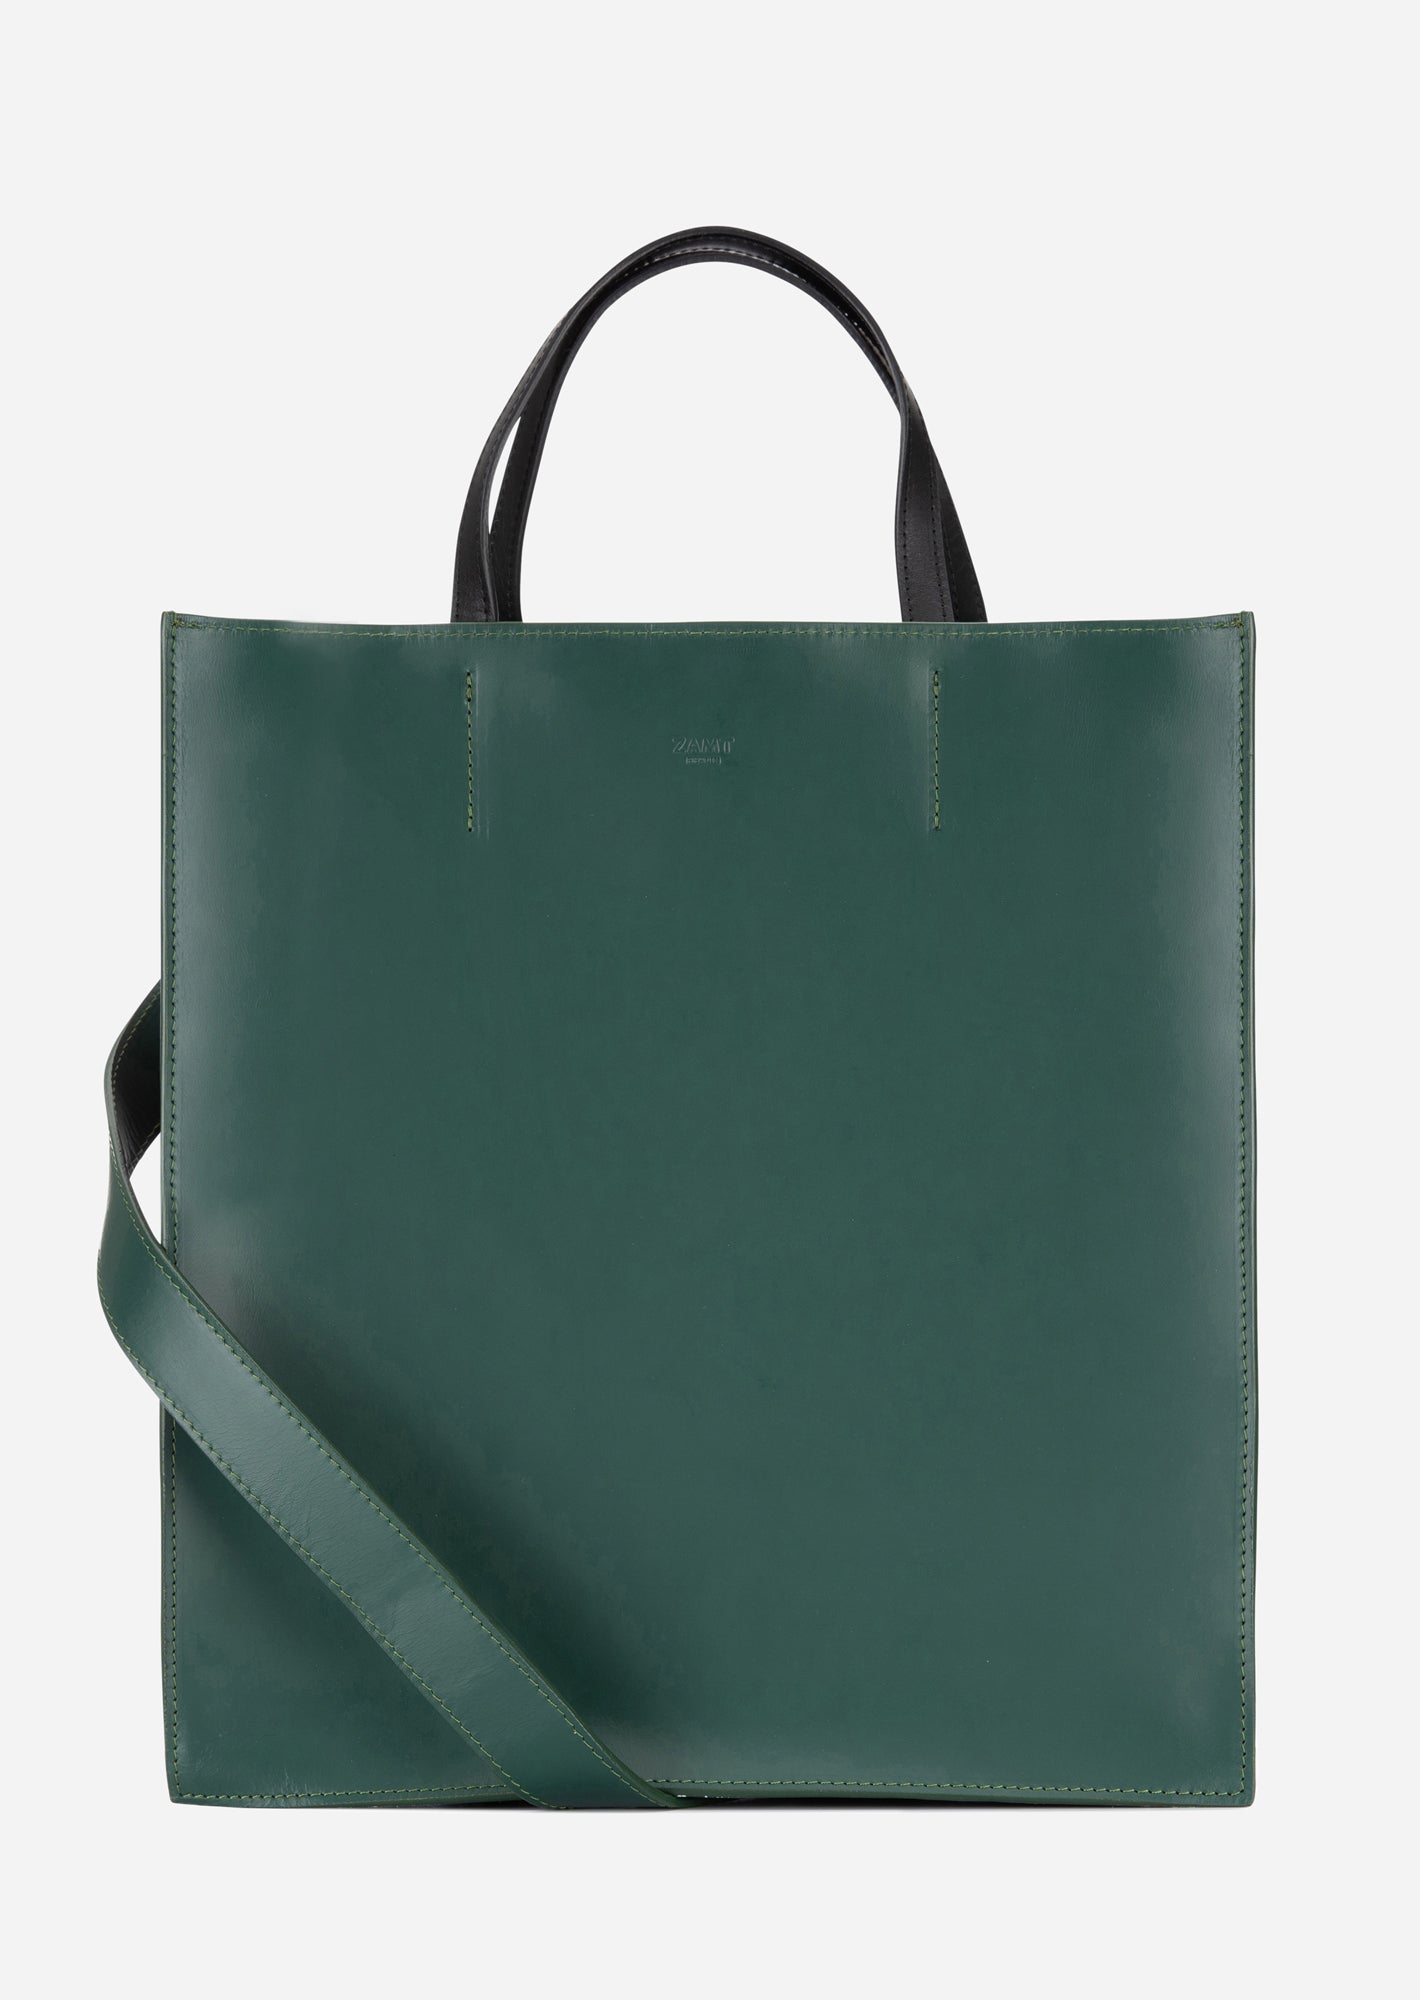 CONTAINER_BAG_FINCH_GREEN_Designed_in_Berlin_Made_to_last_Handmade_in_Poland.